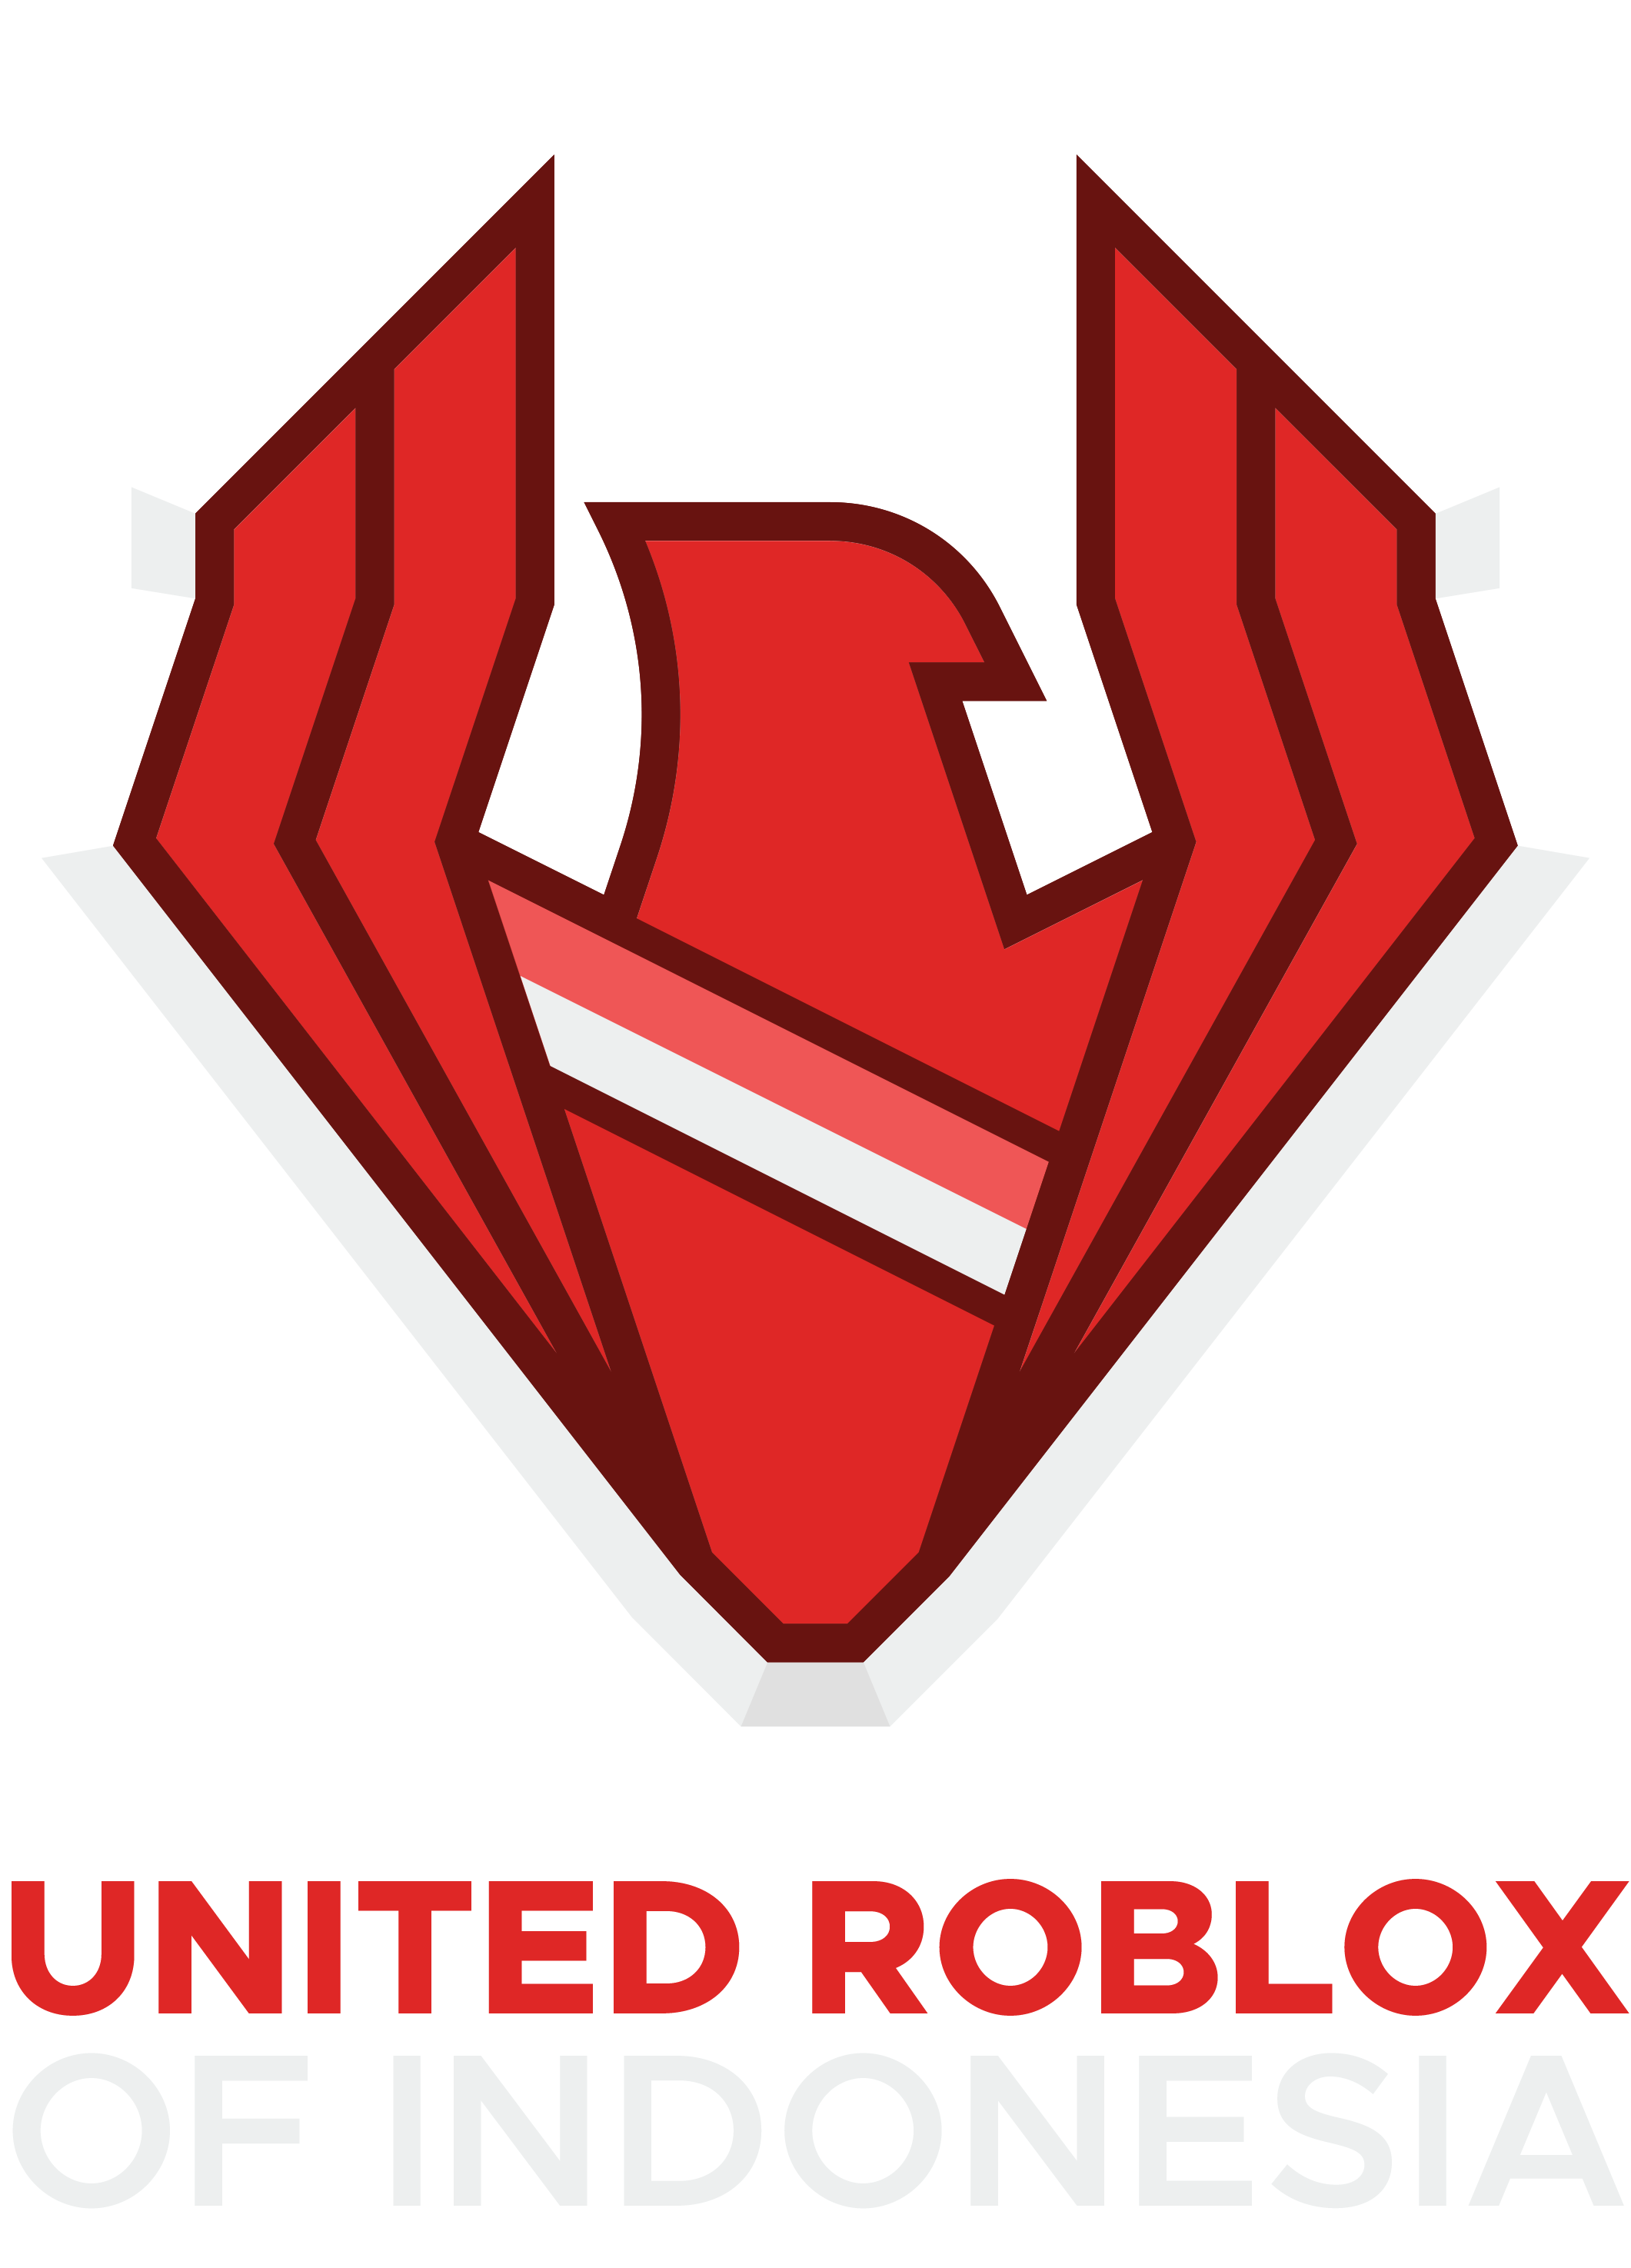 United Roblox Of Indonesia Roblox Wiki Fandom - 10 best roblox logos for youtubers